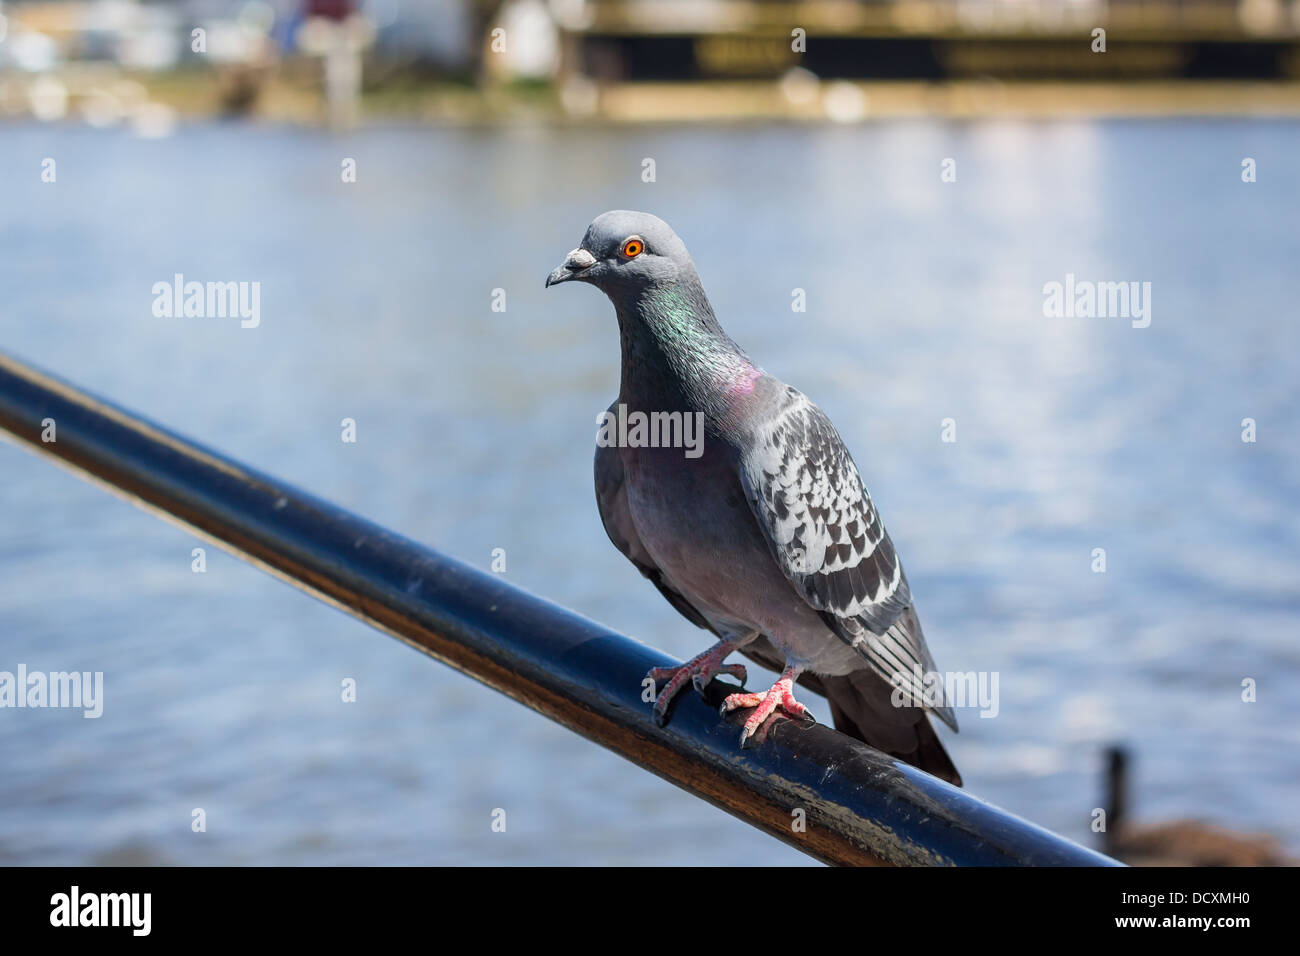 Single pigeon sitting on a bar by the river Stock Photo